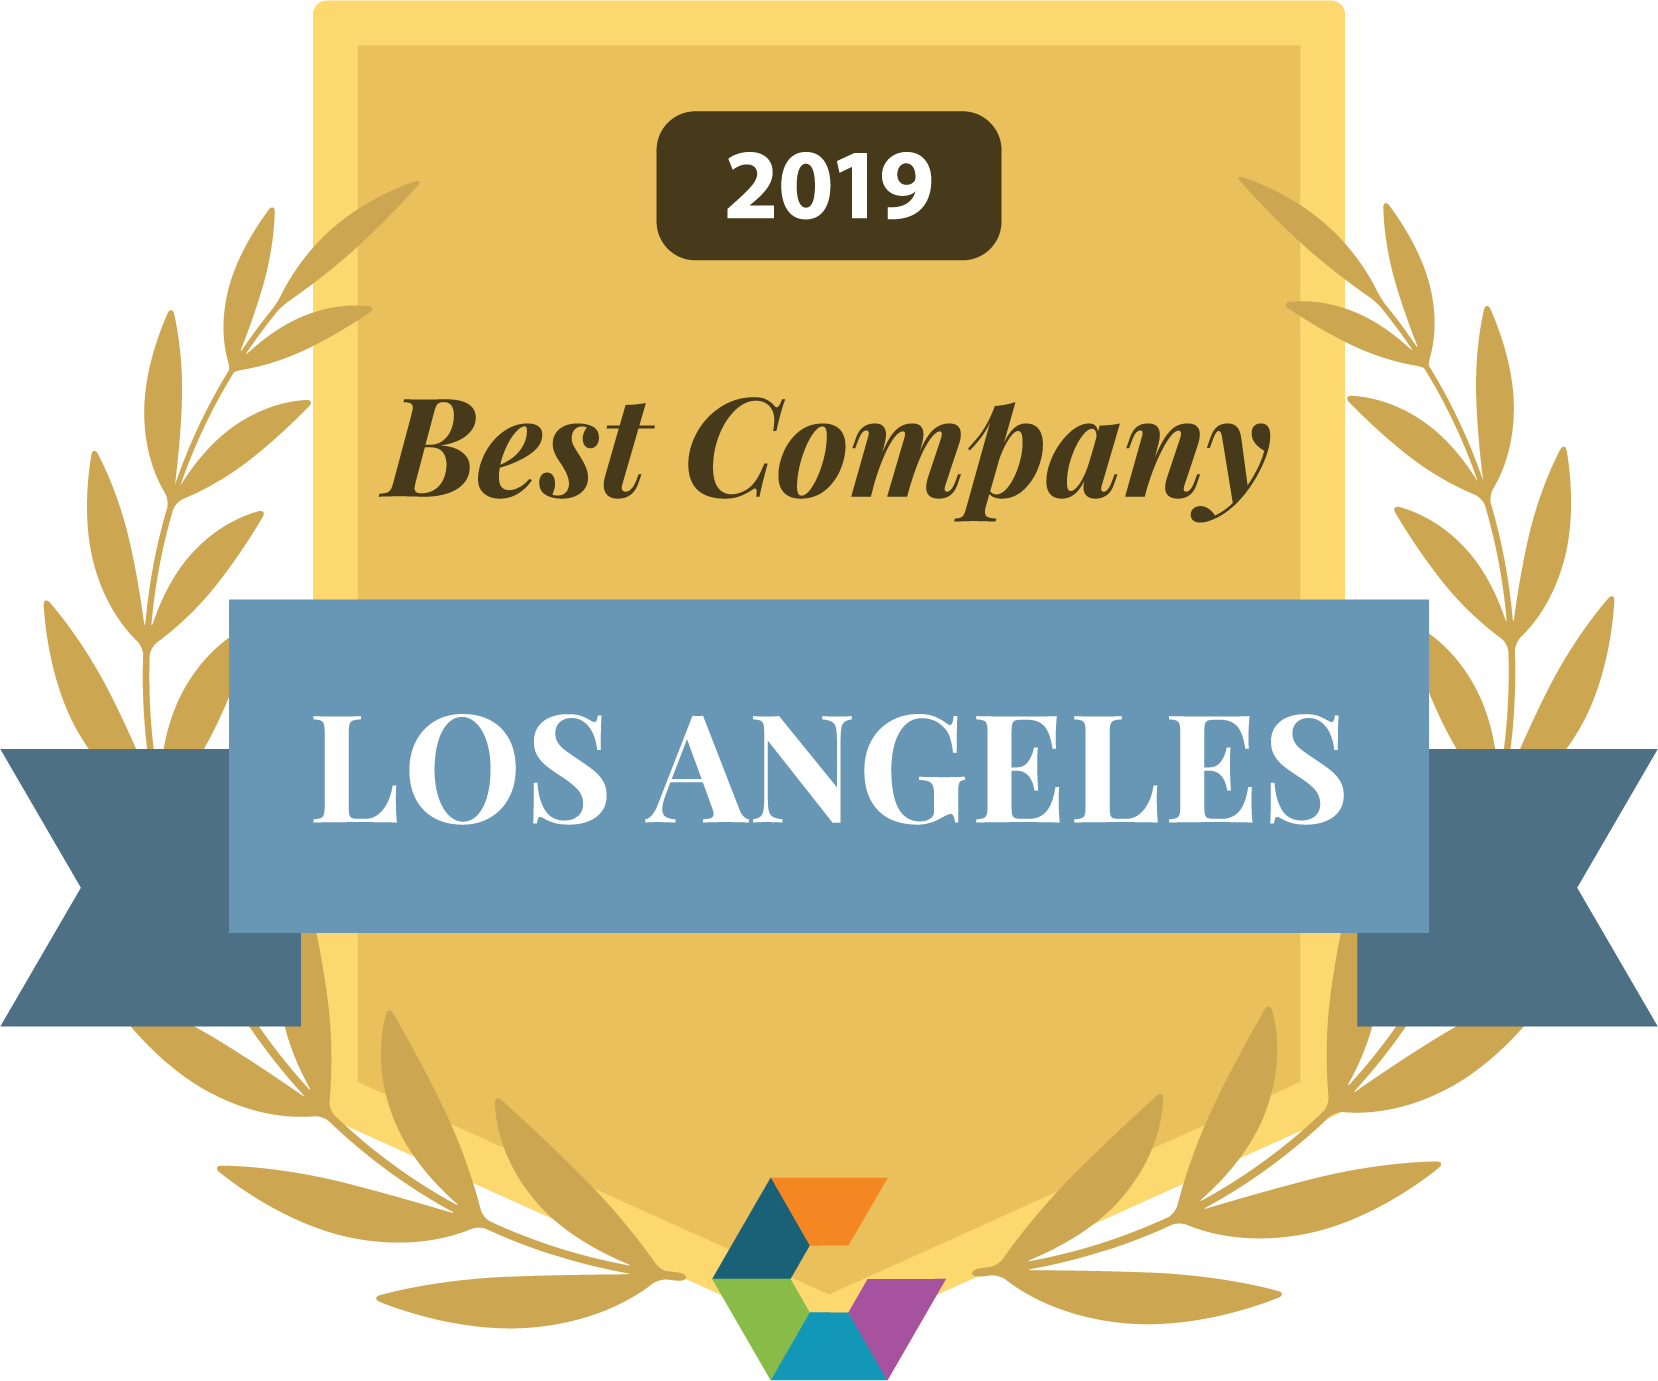 Comparably Names FaceFirst as One of the Top Places to Work in Los Angeles